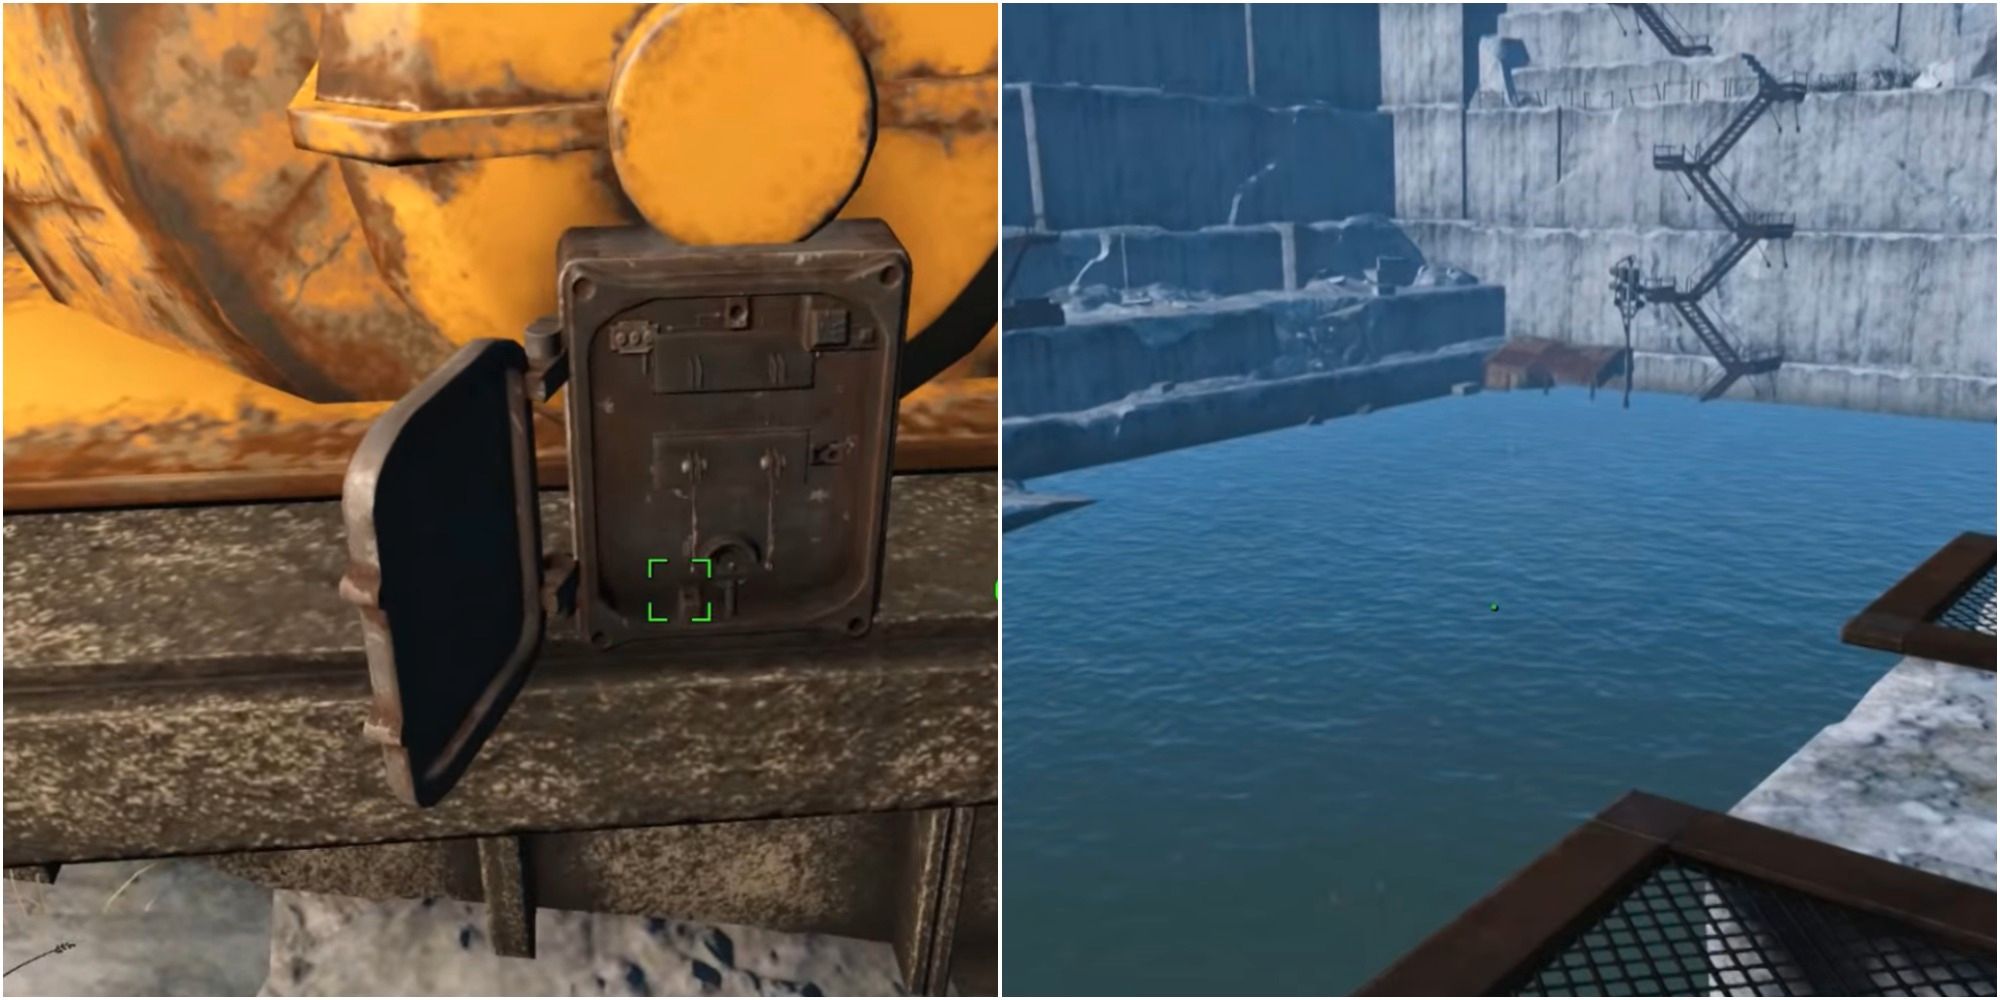 Fallout 4 Pull The Plug Guide Featured Split Image Circuit Breaker and Water